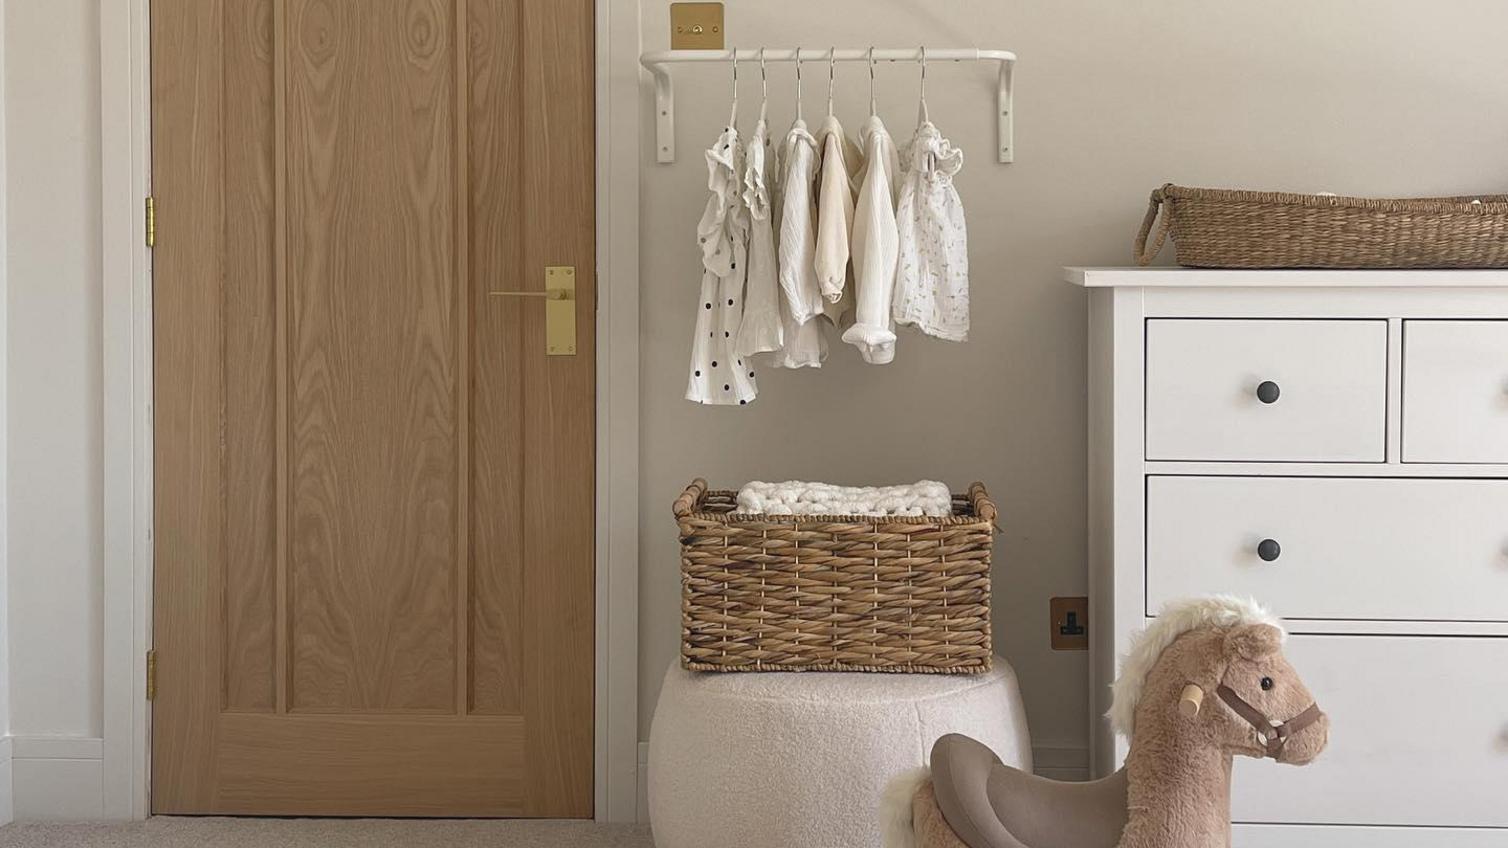 An oak veneer door in a white room with a rocking horse